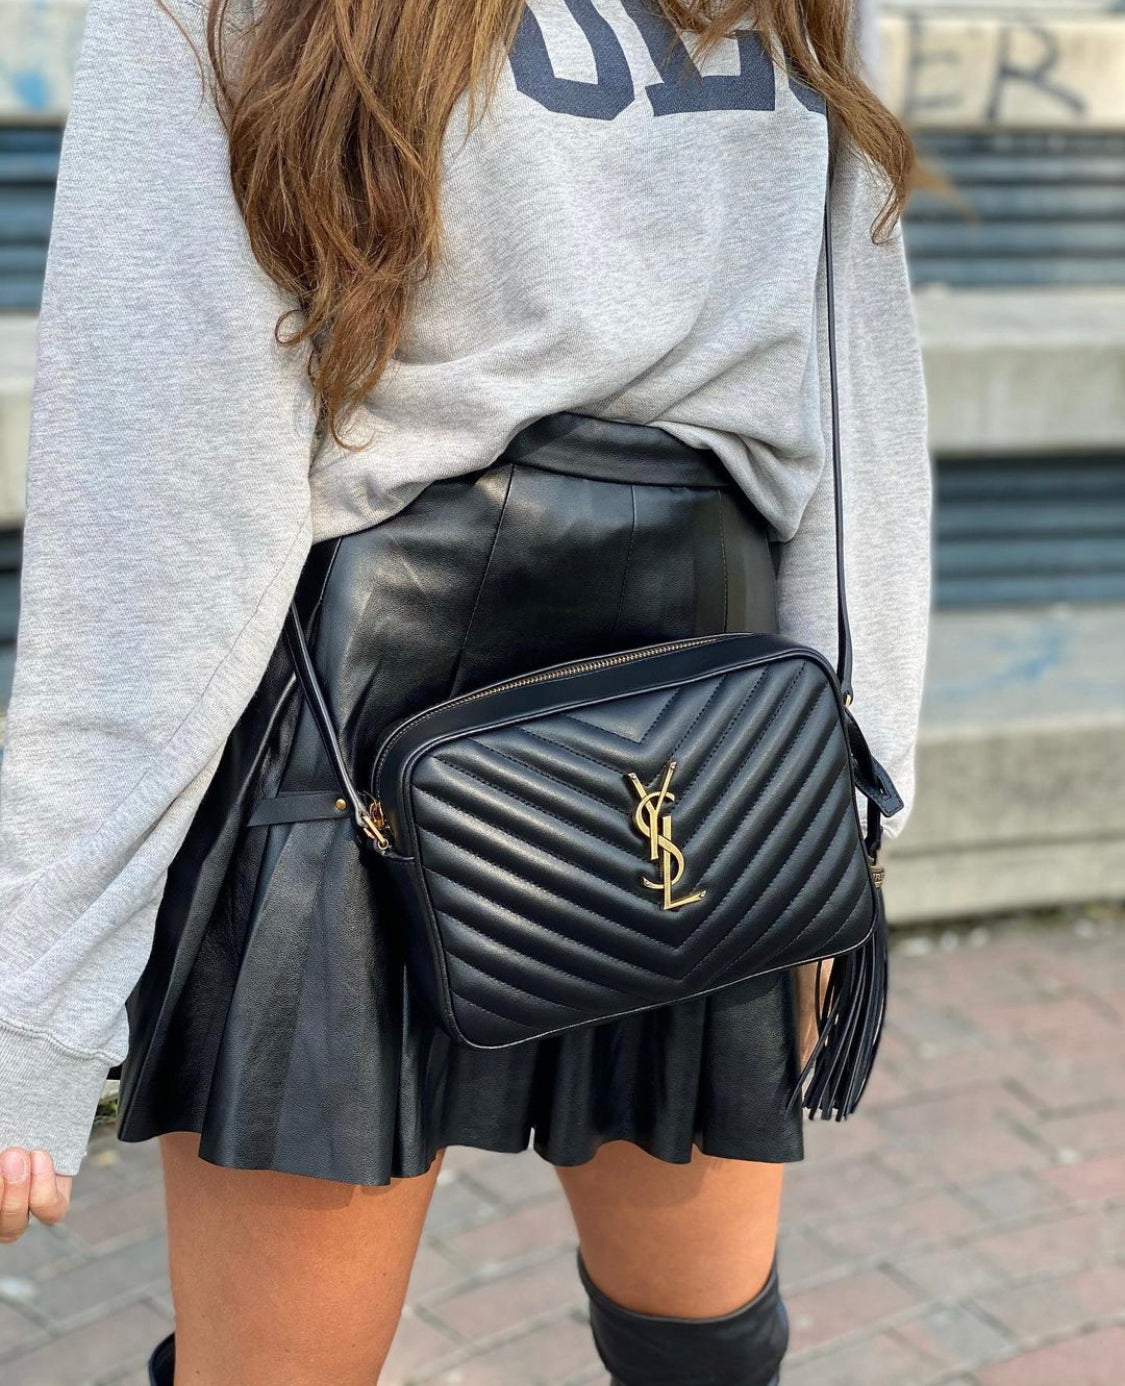 YSL CAMERA BAG IN QUILTED LEATHER